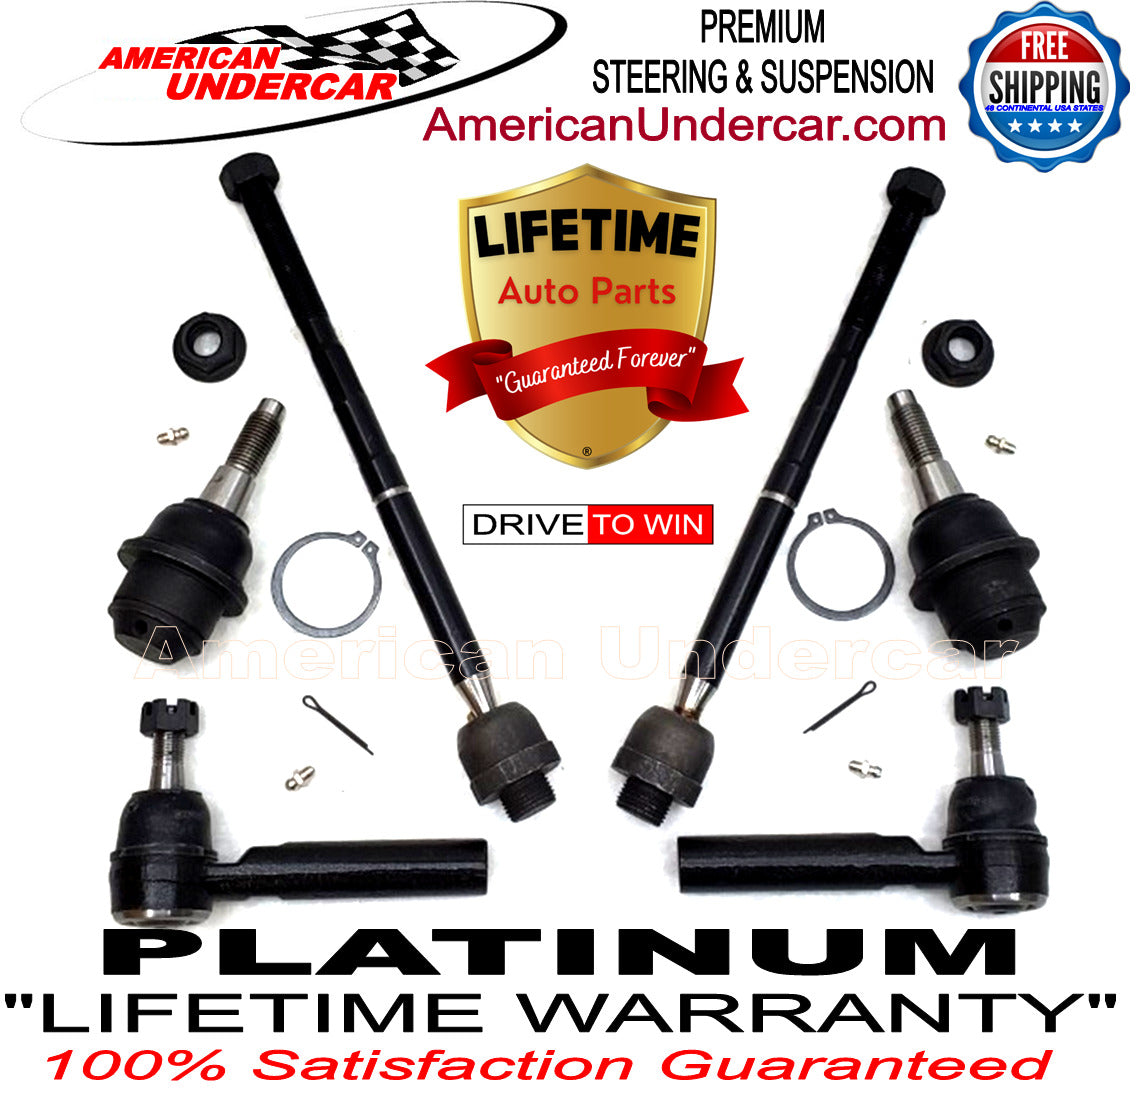 Lifetime Ball Joint and Tie Rod Steering Kit for 2014-2018 Chevrolet, GMC, Cadillac 2WD, 4x4